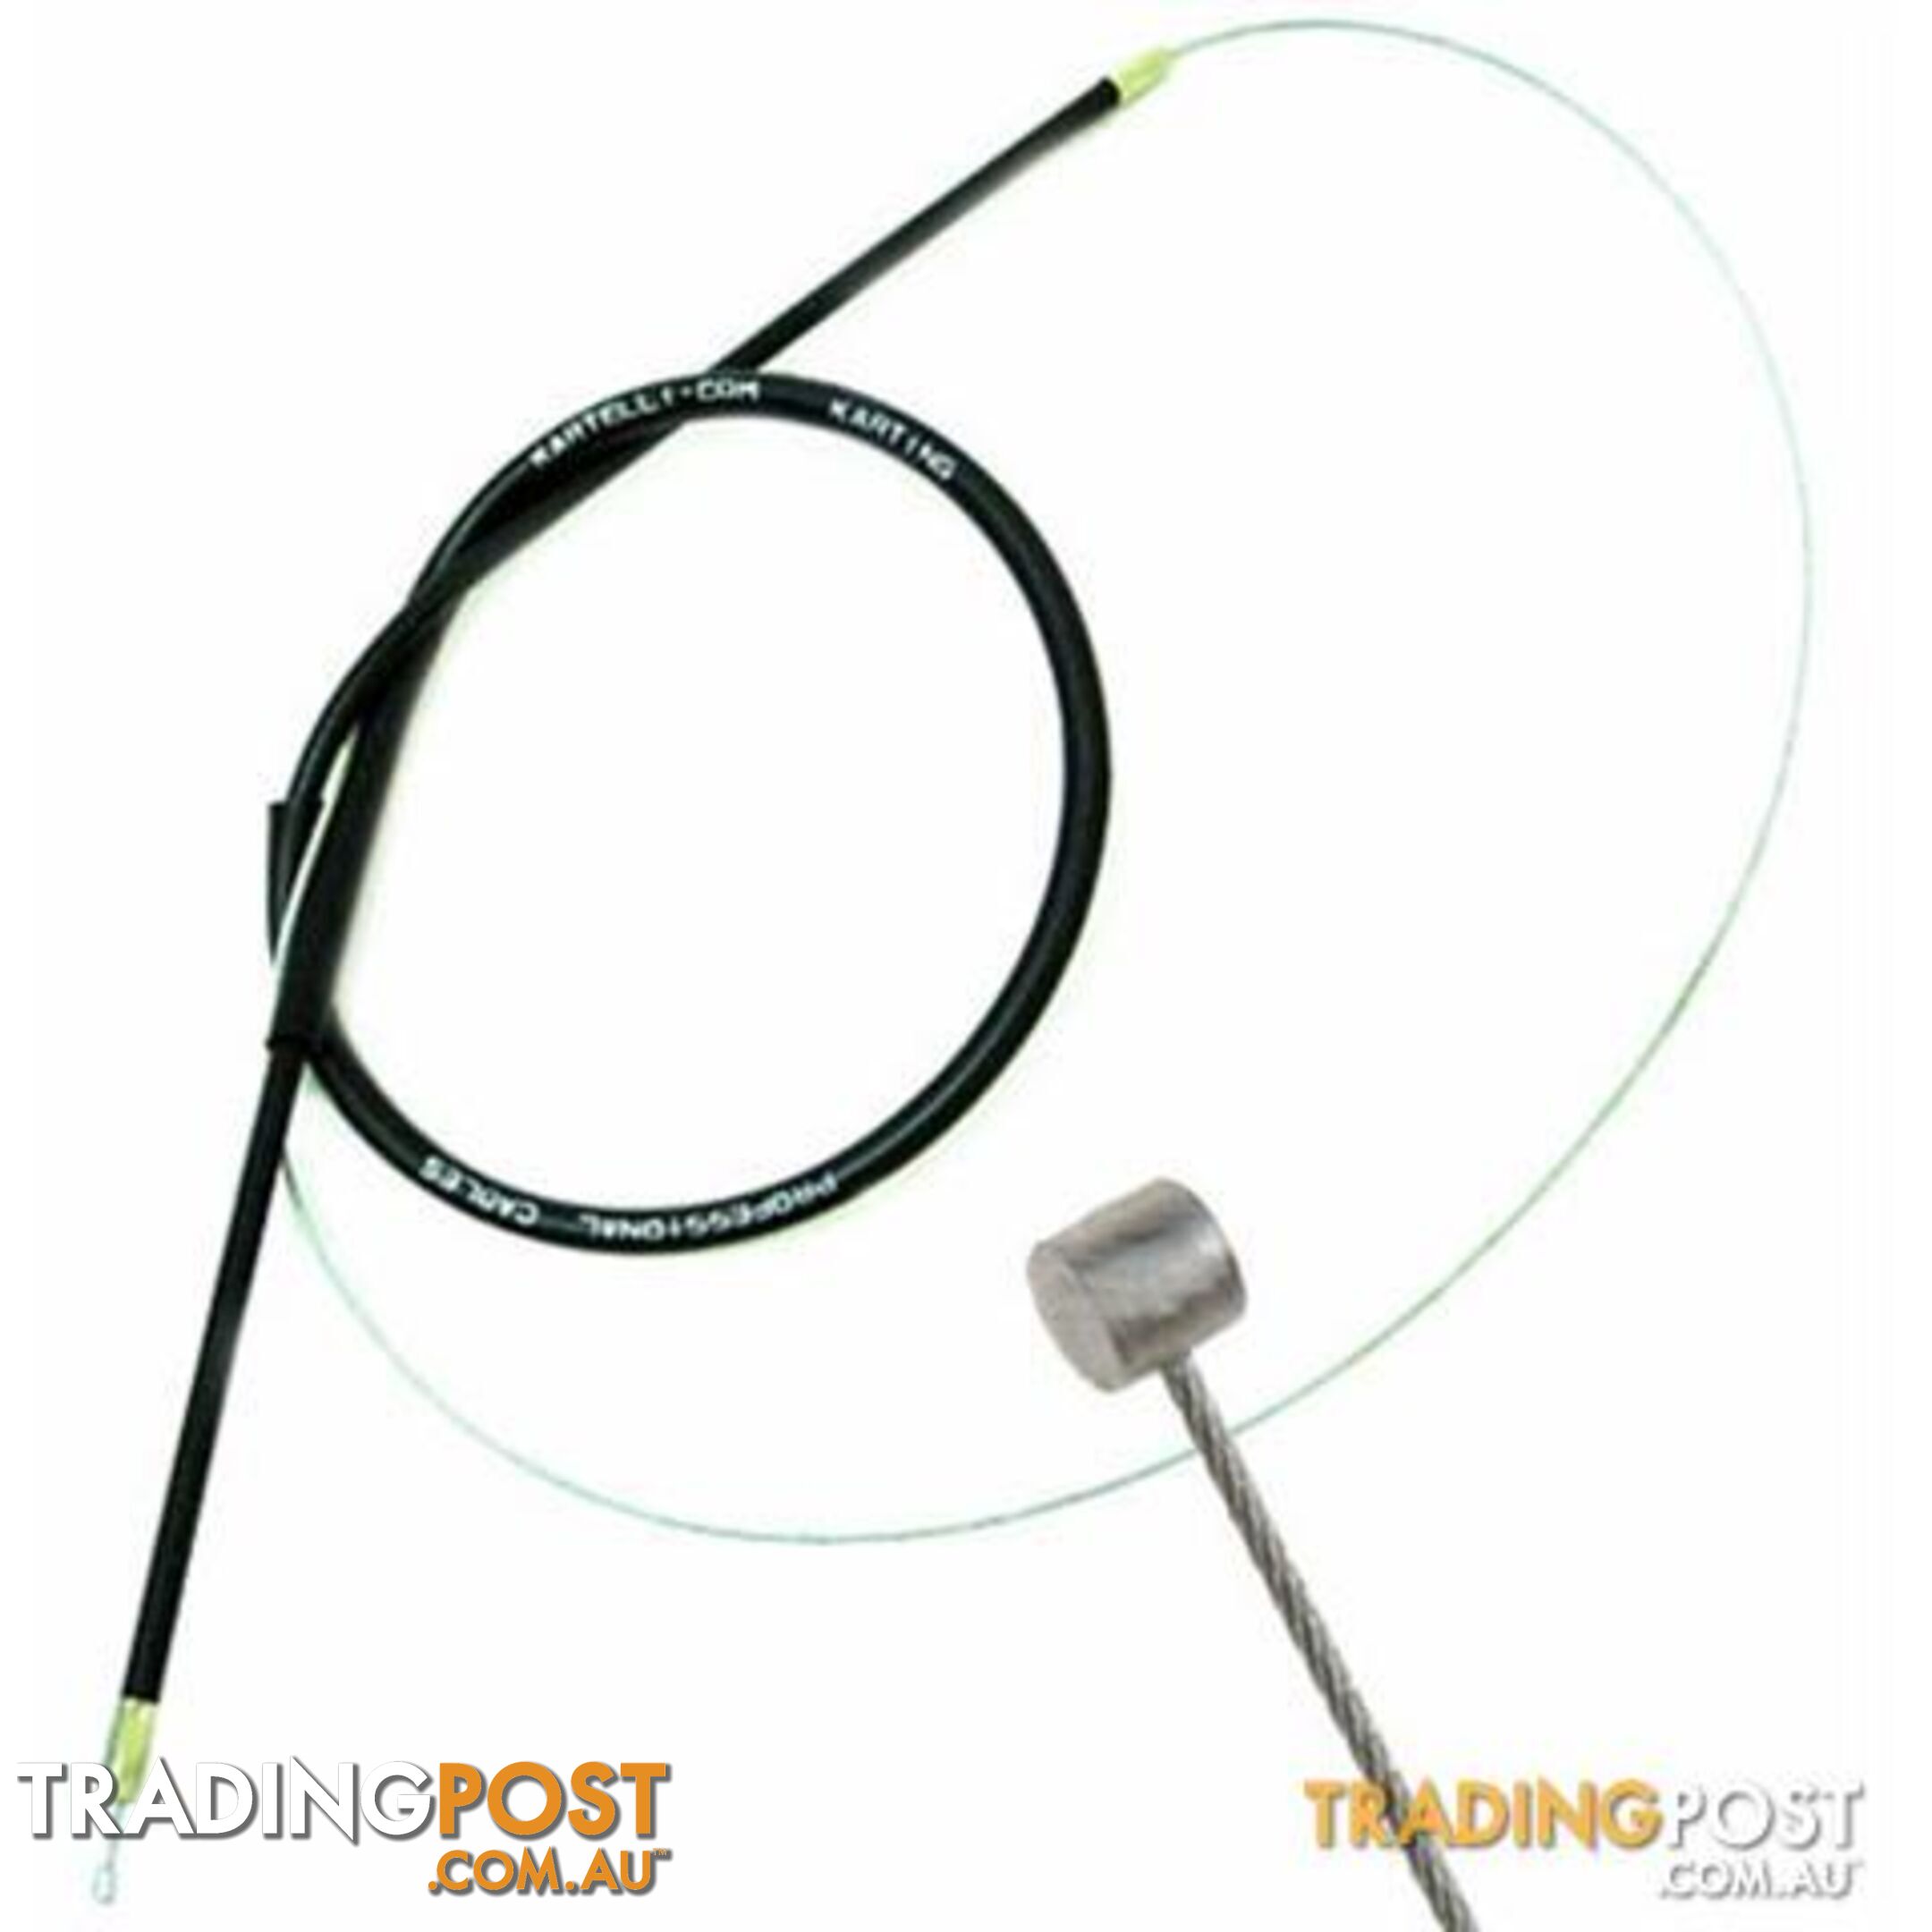 Go Kart Accelerator Cable  Round  Black  Long - ALL BRAND NEW !!!